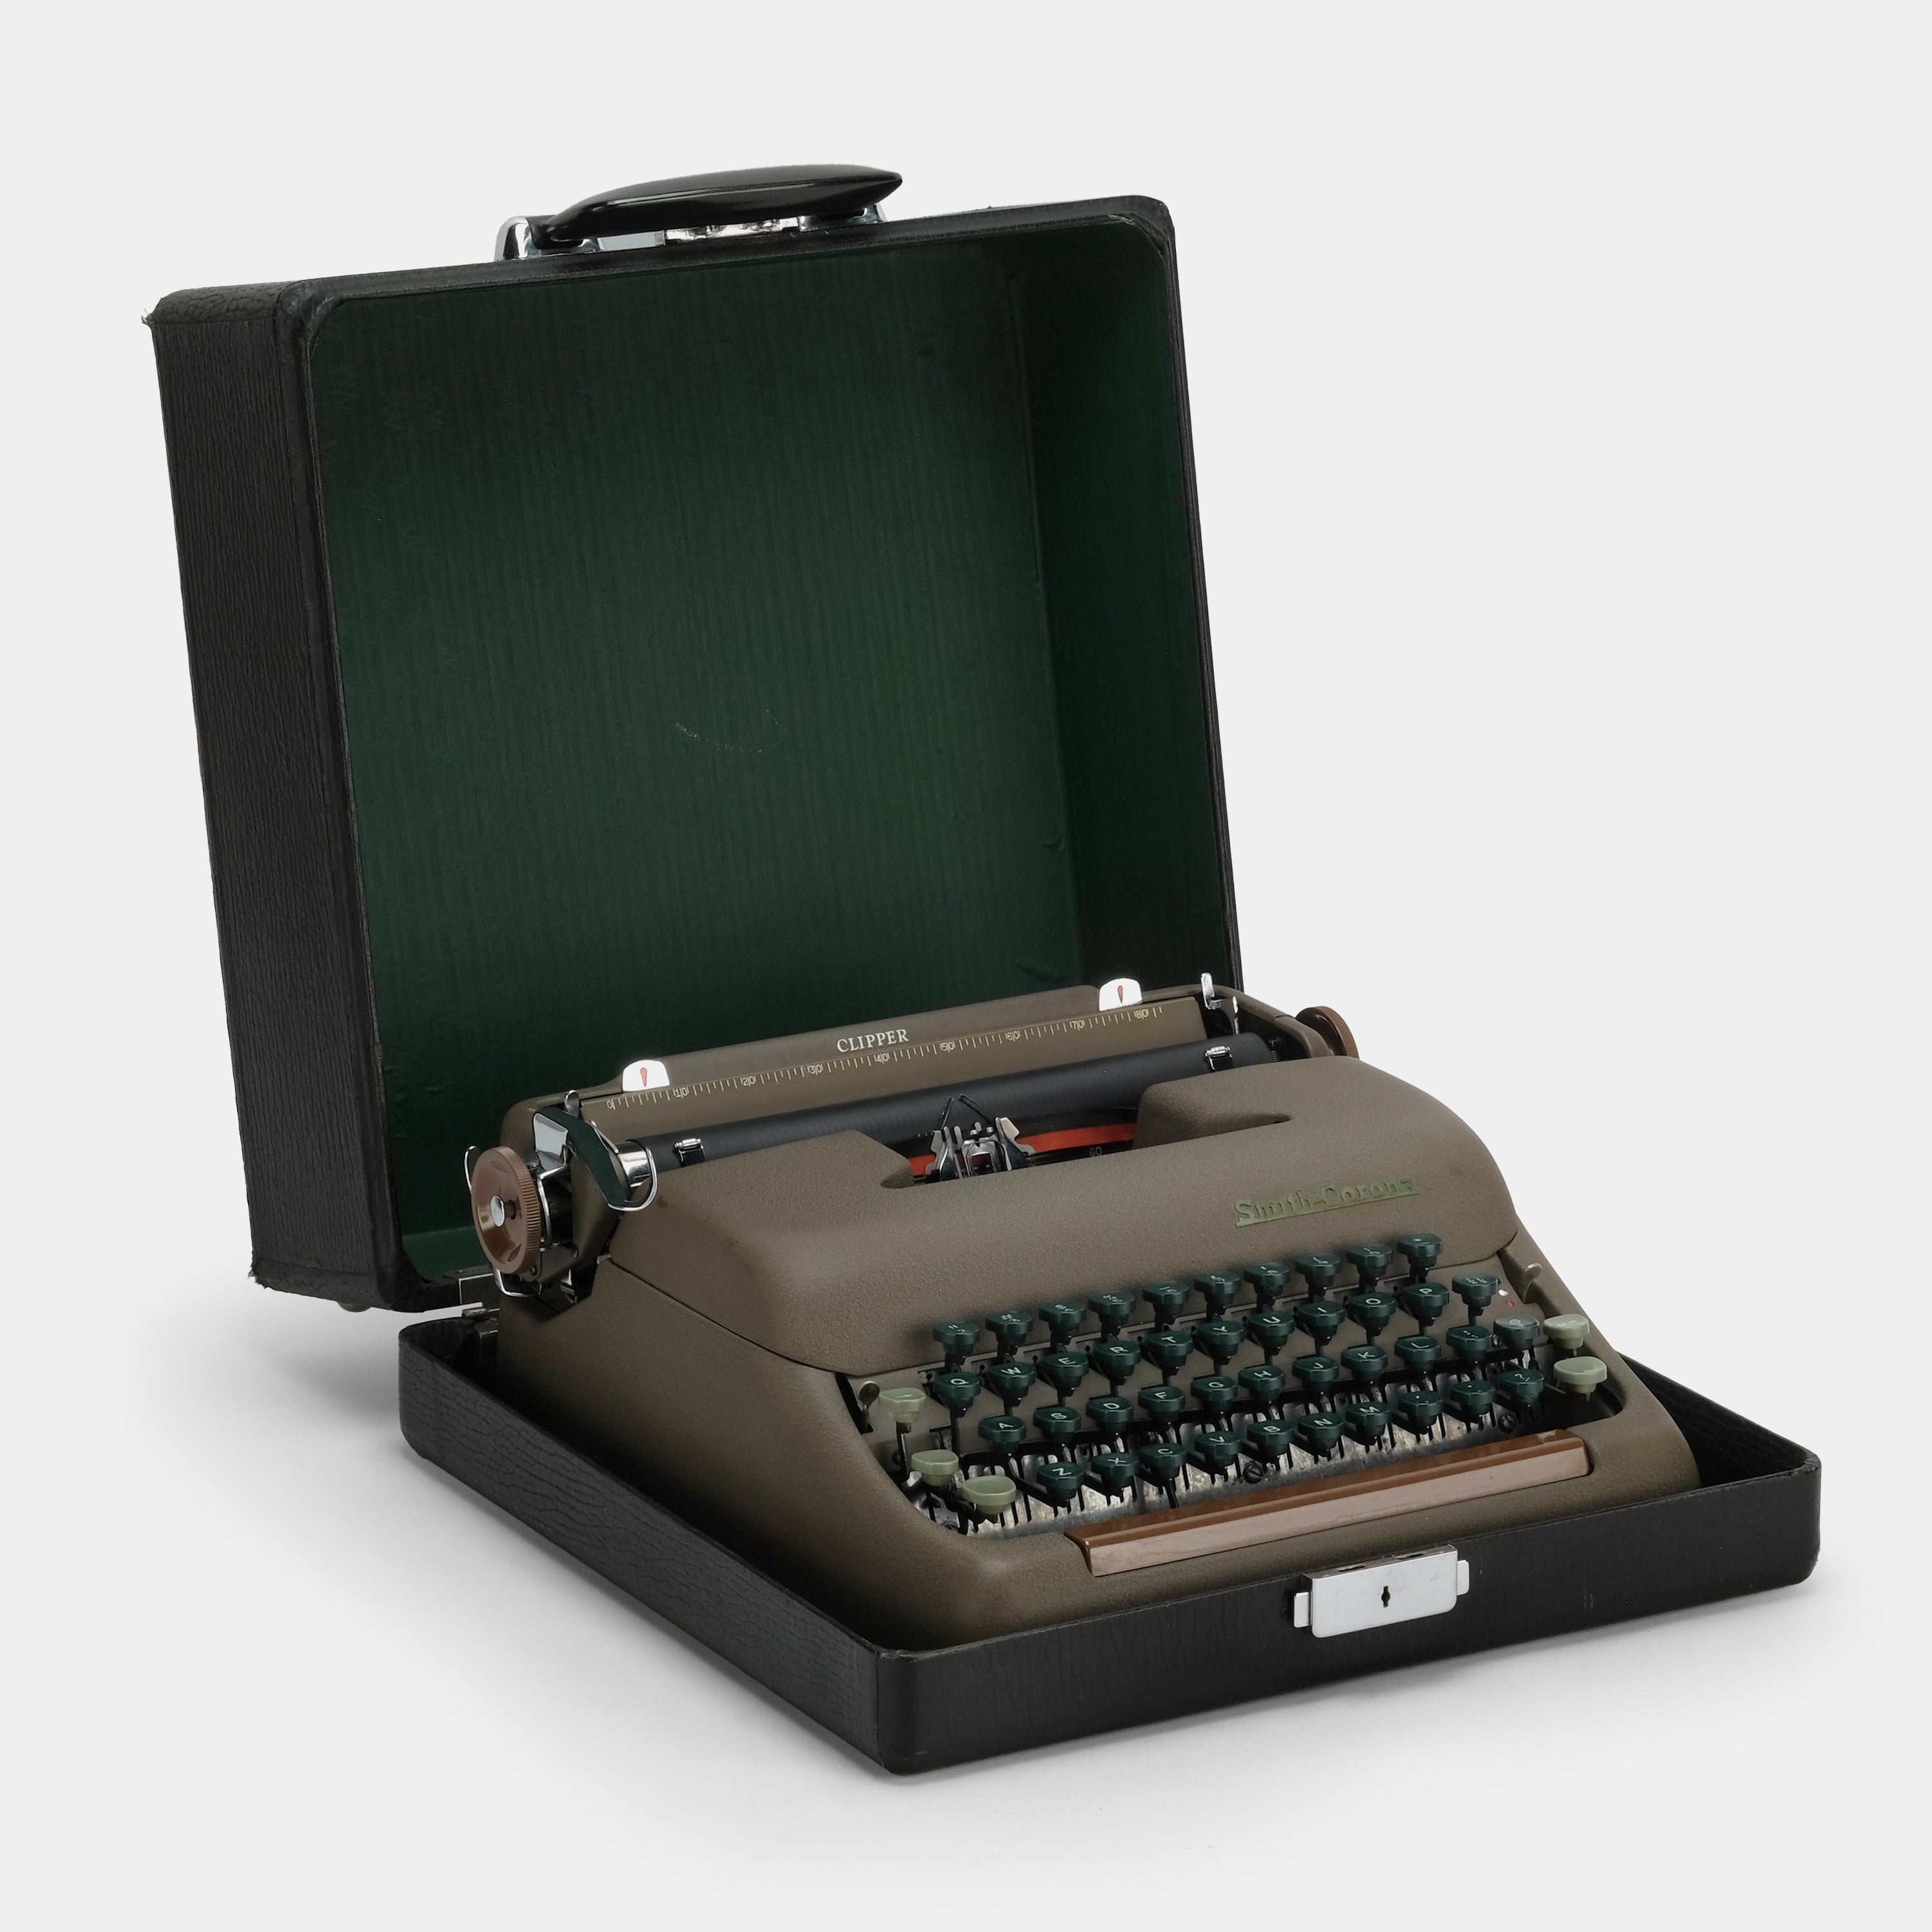 Smith-Corona Clipper Brown and Green Manual Typewriter and Case